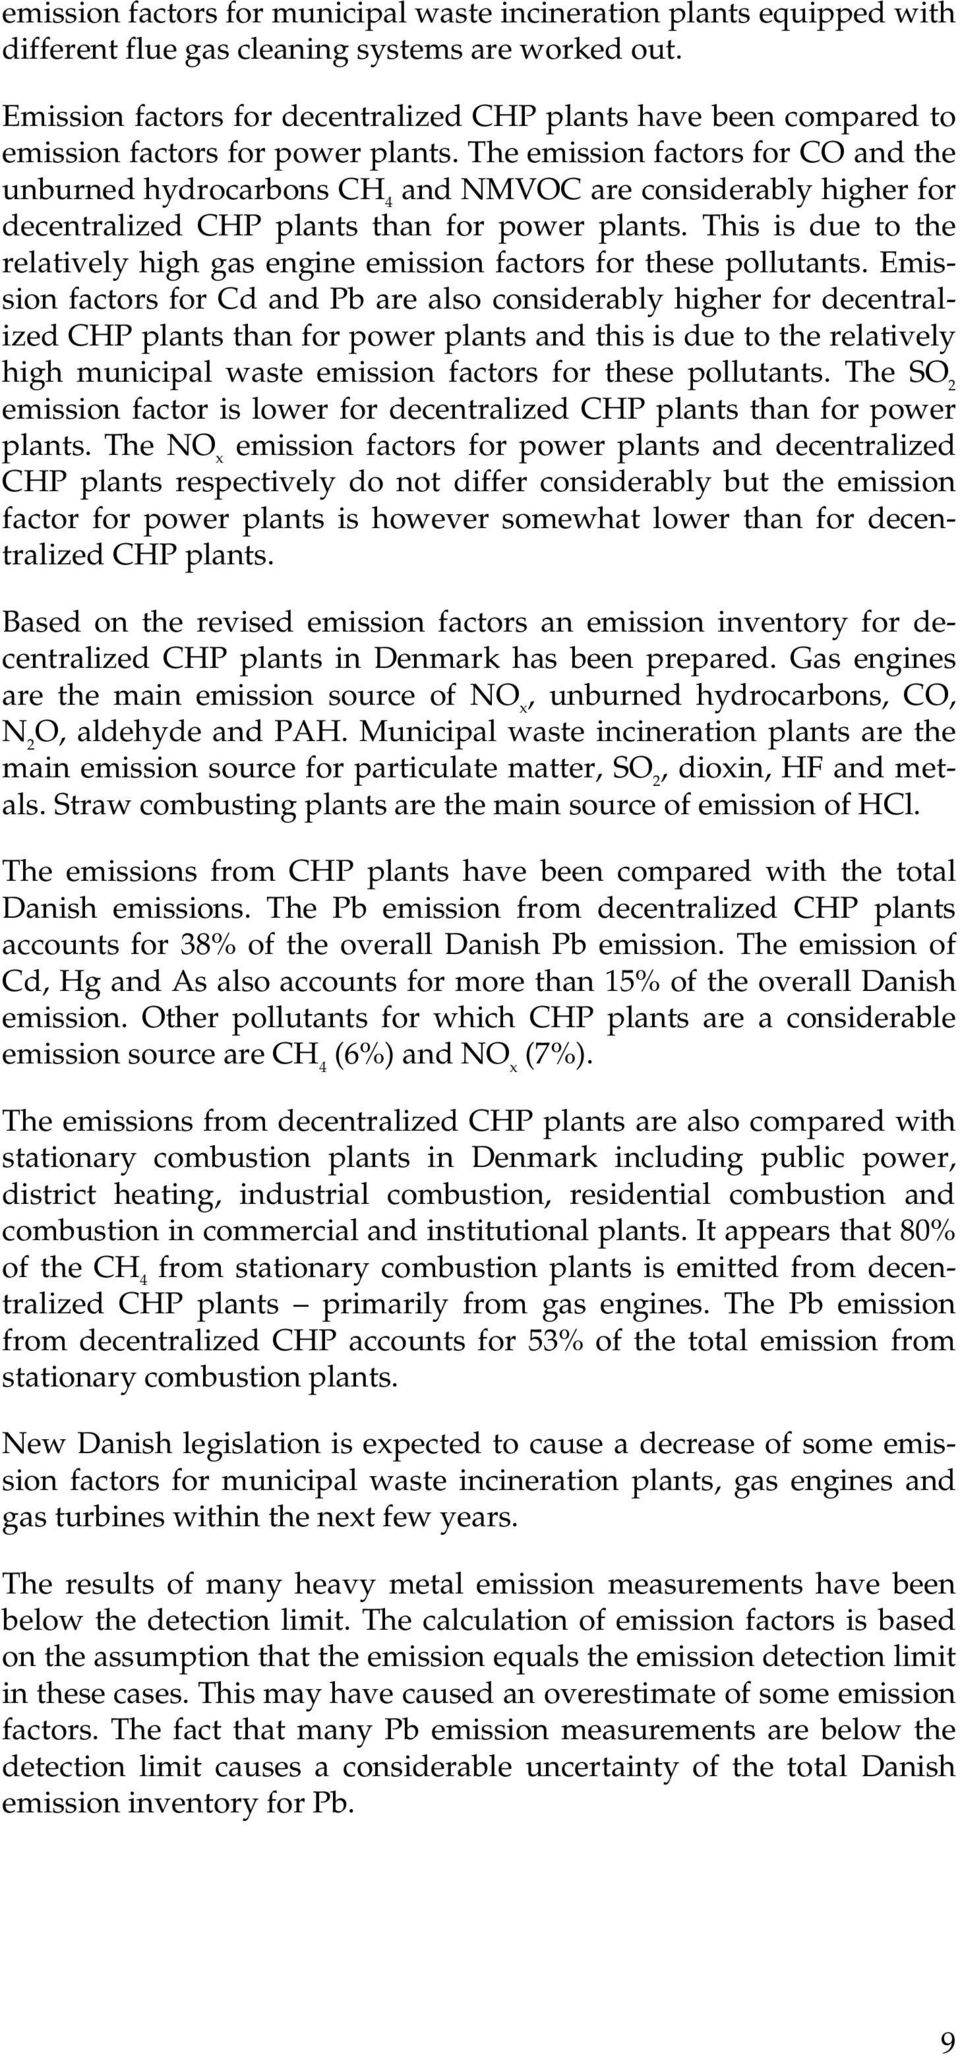 The emission factors for CO and the unburned hydrocarbons CH 4 and NMVOC are considerably higher for decentralized CHP plants than for power plants.